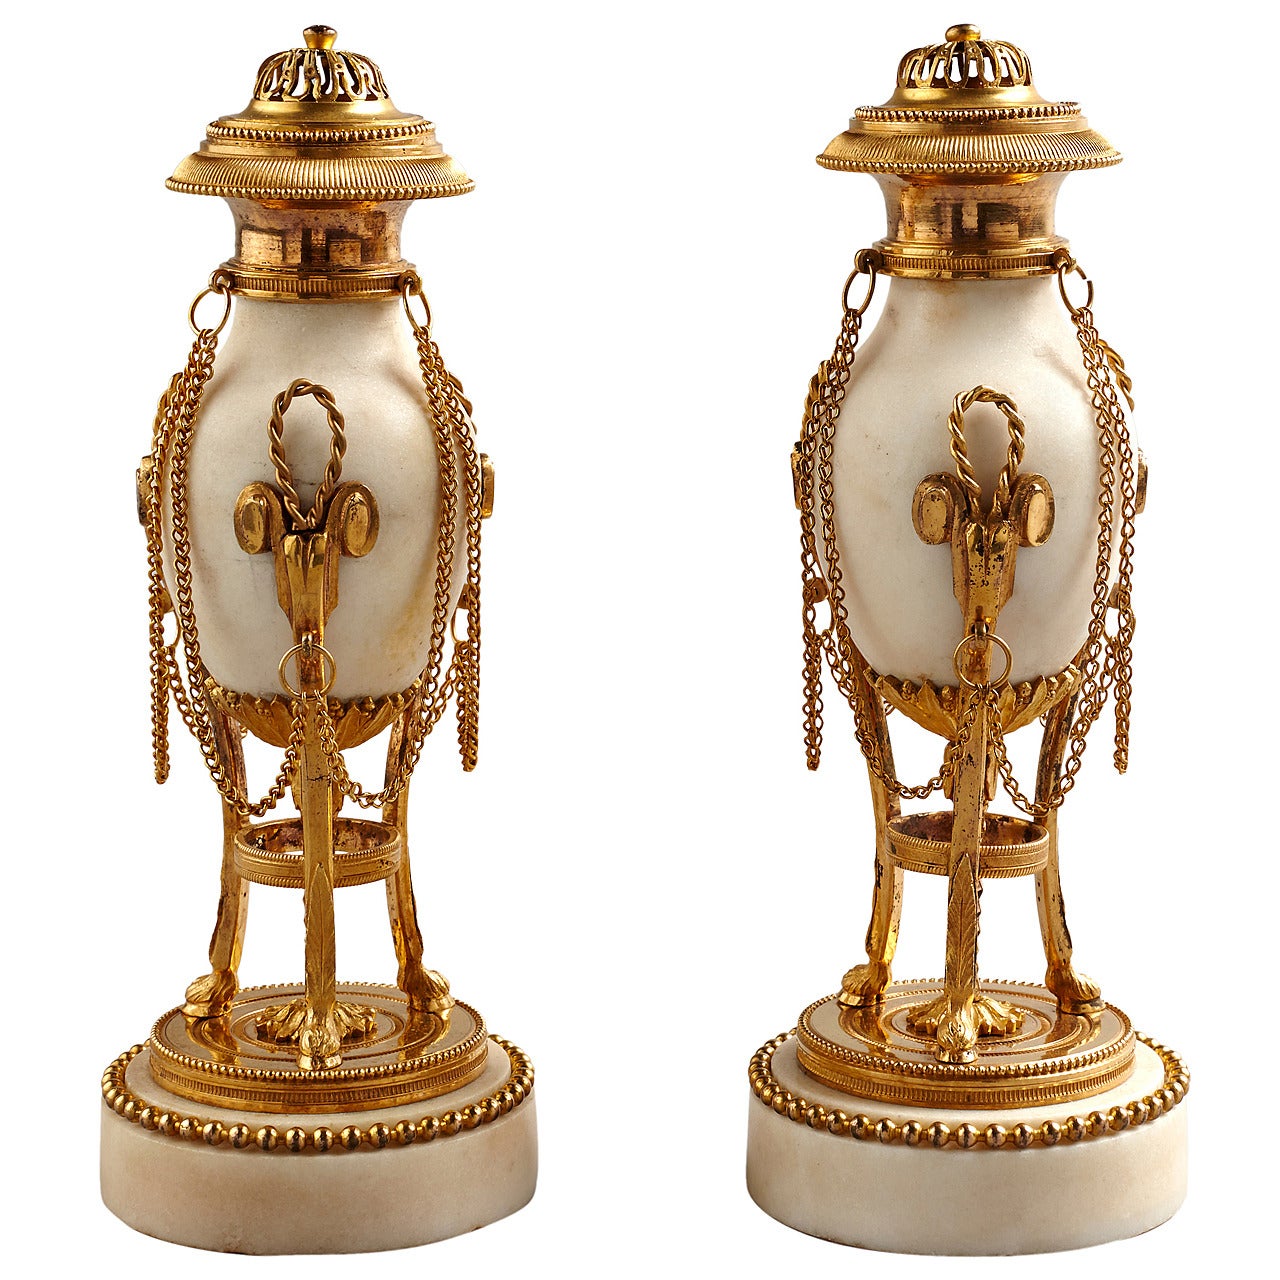 Pair of Late 18th Century Louis XVI Cassolettes Candleholders